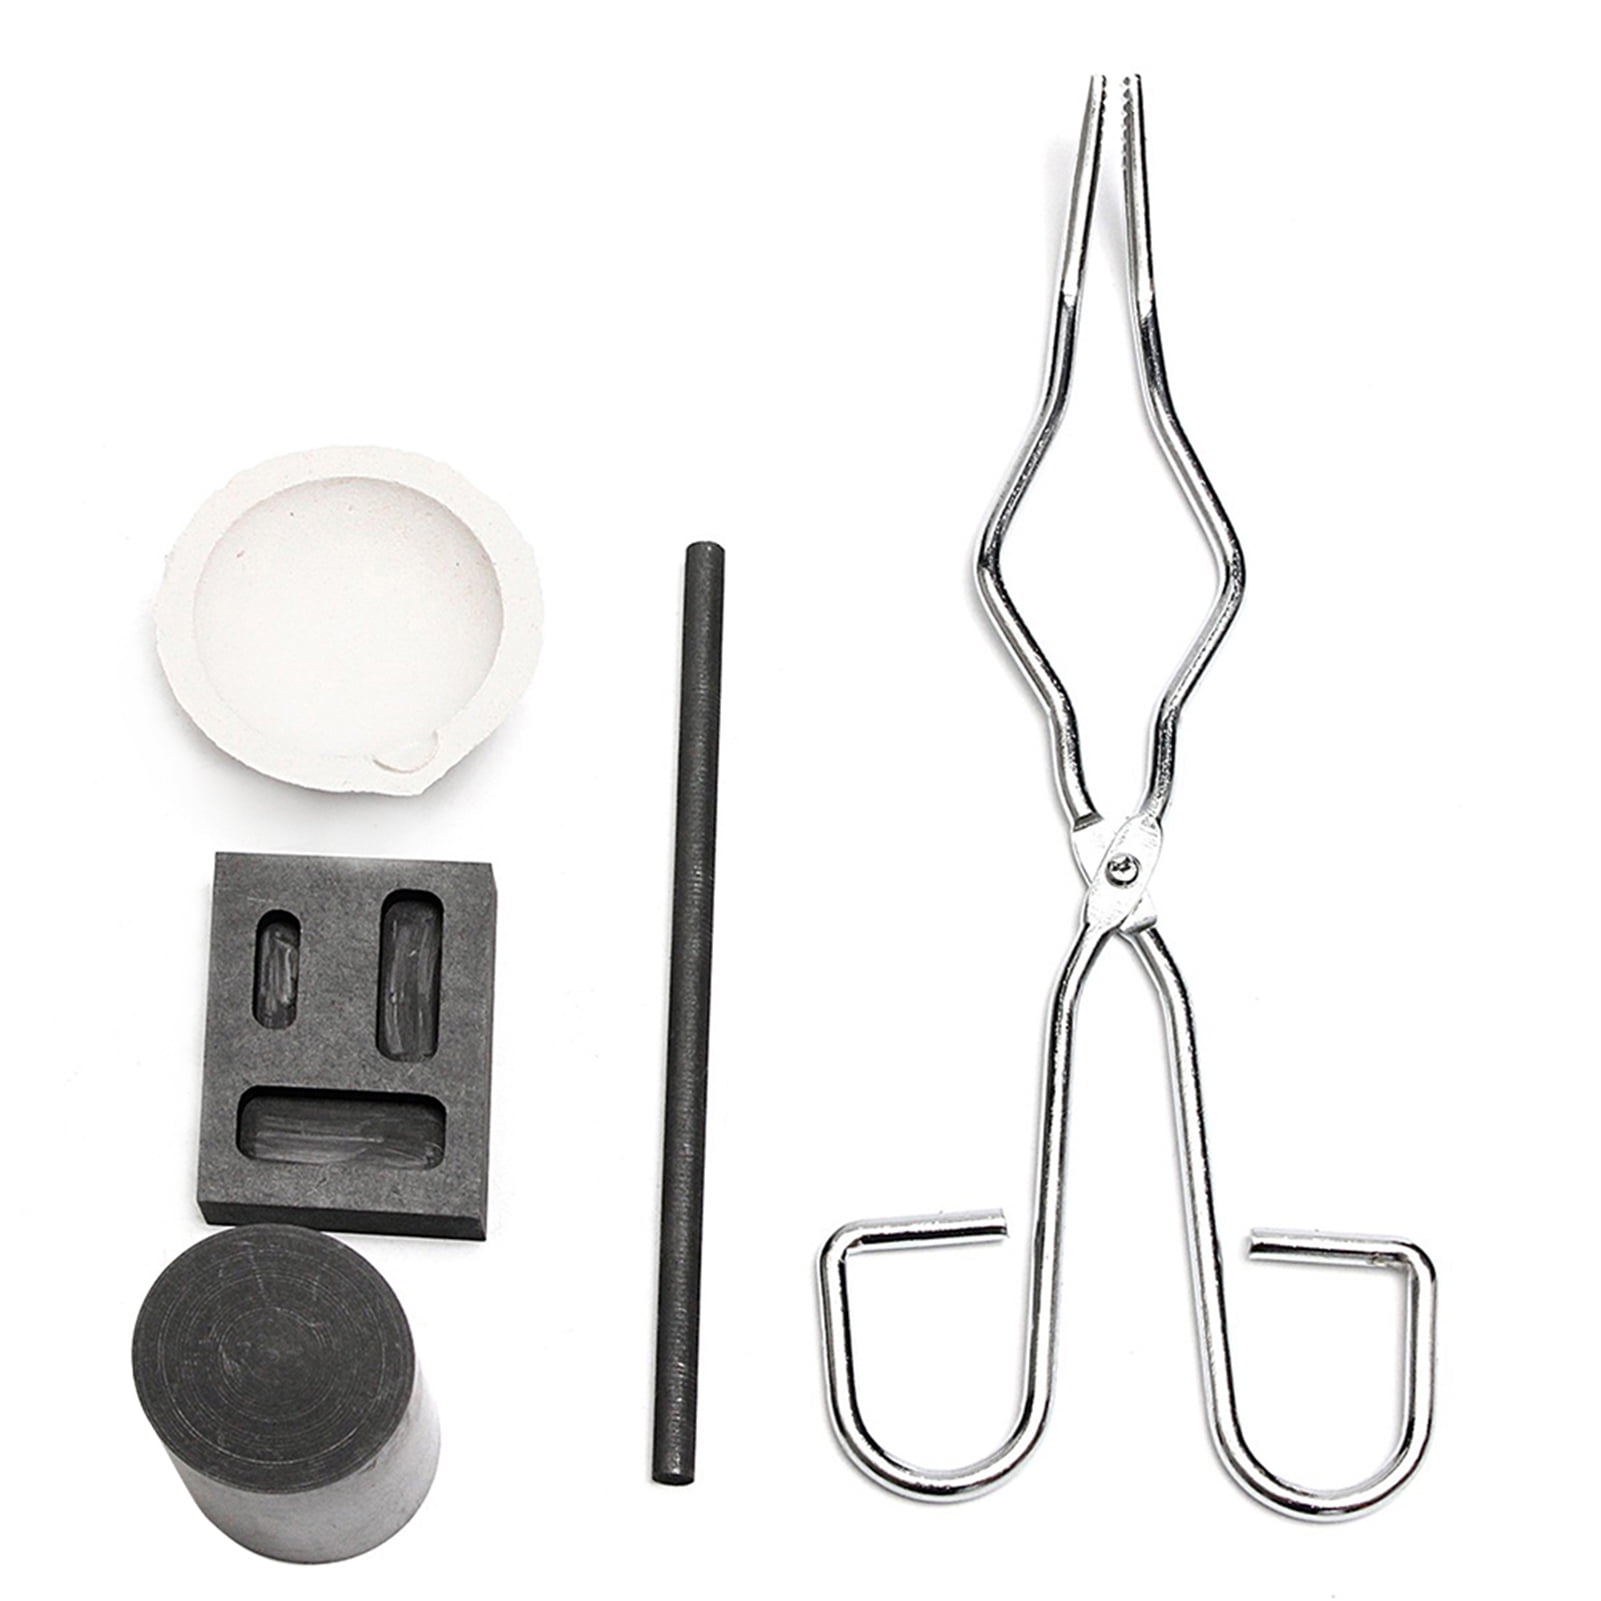  Jewelry Smelting Gold Silver Set Kit Ceramic Foundry Crucible  Tongs Flux 17A : Arts, Crafts & Sewing